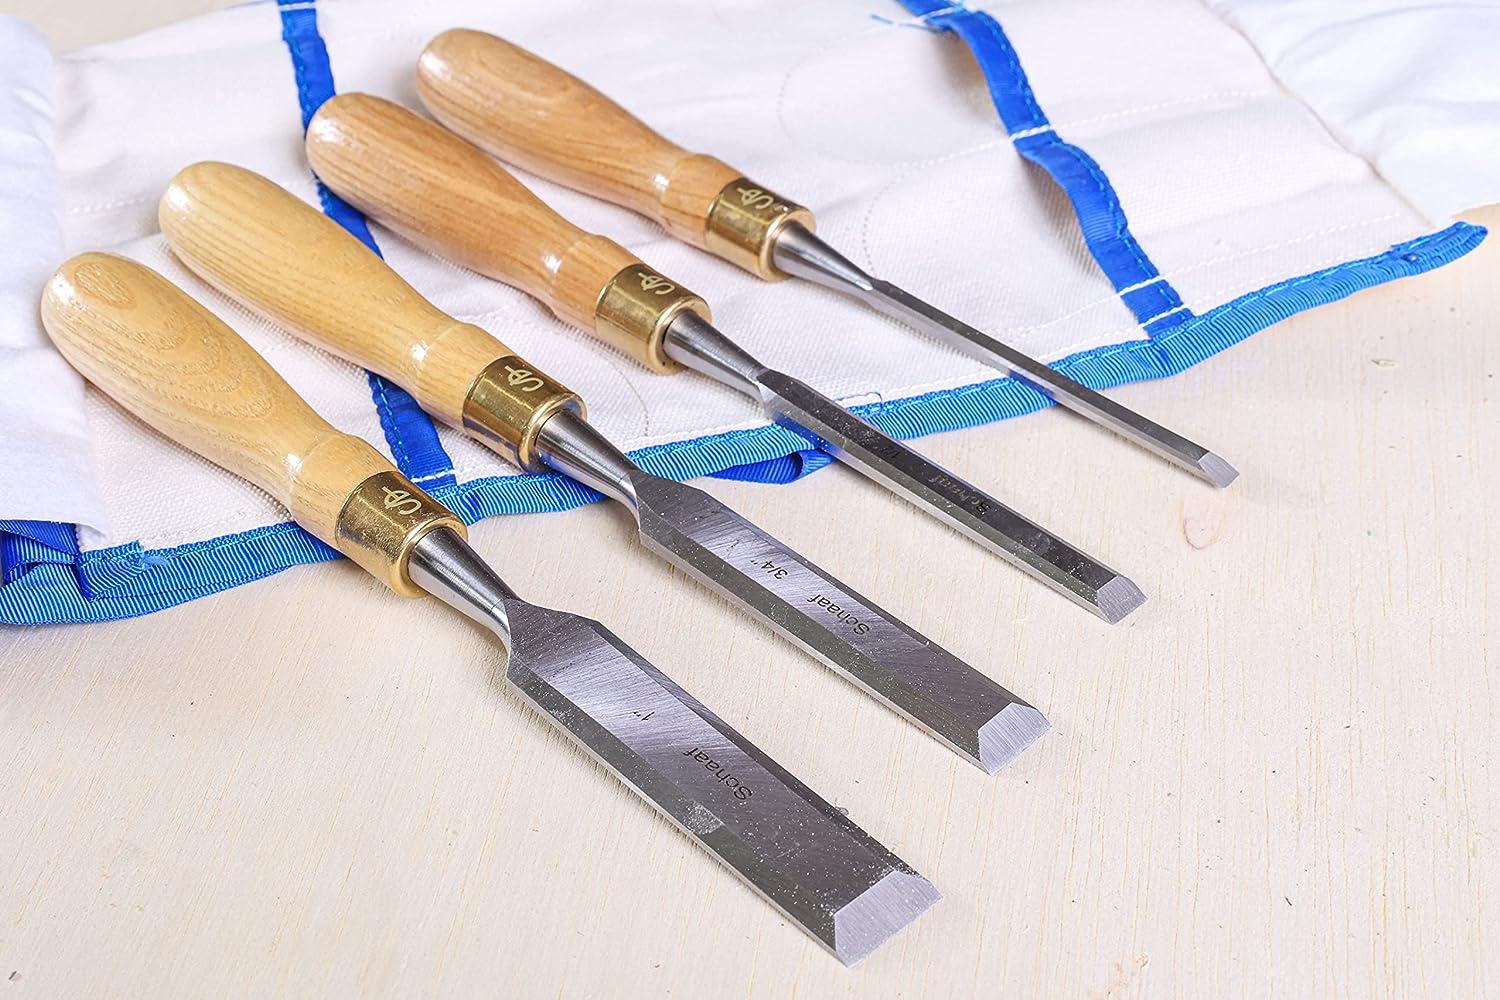 Schaaf Wood Carving Tools Set of 12 Chisels with Qatar